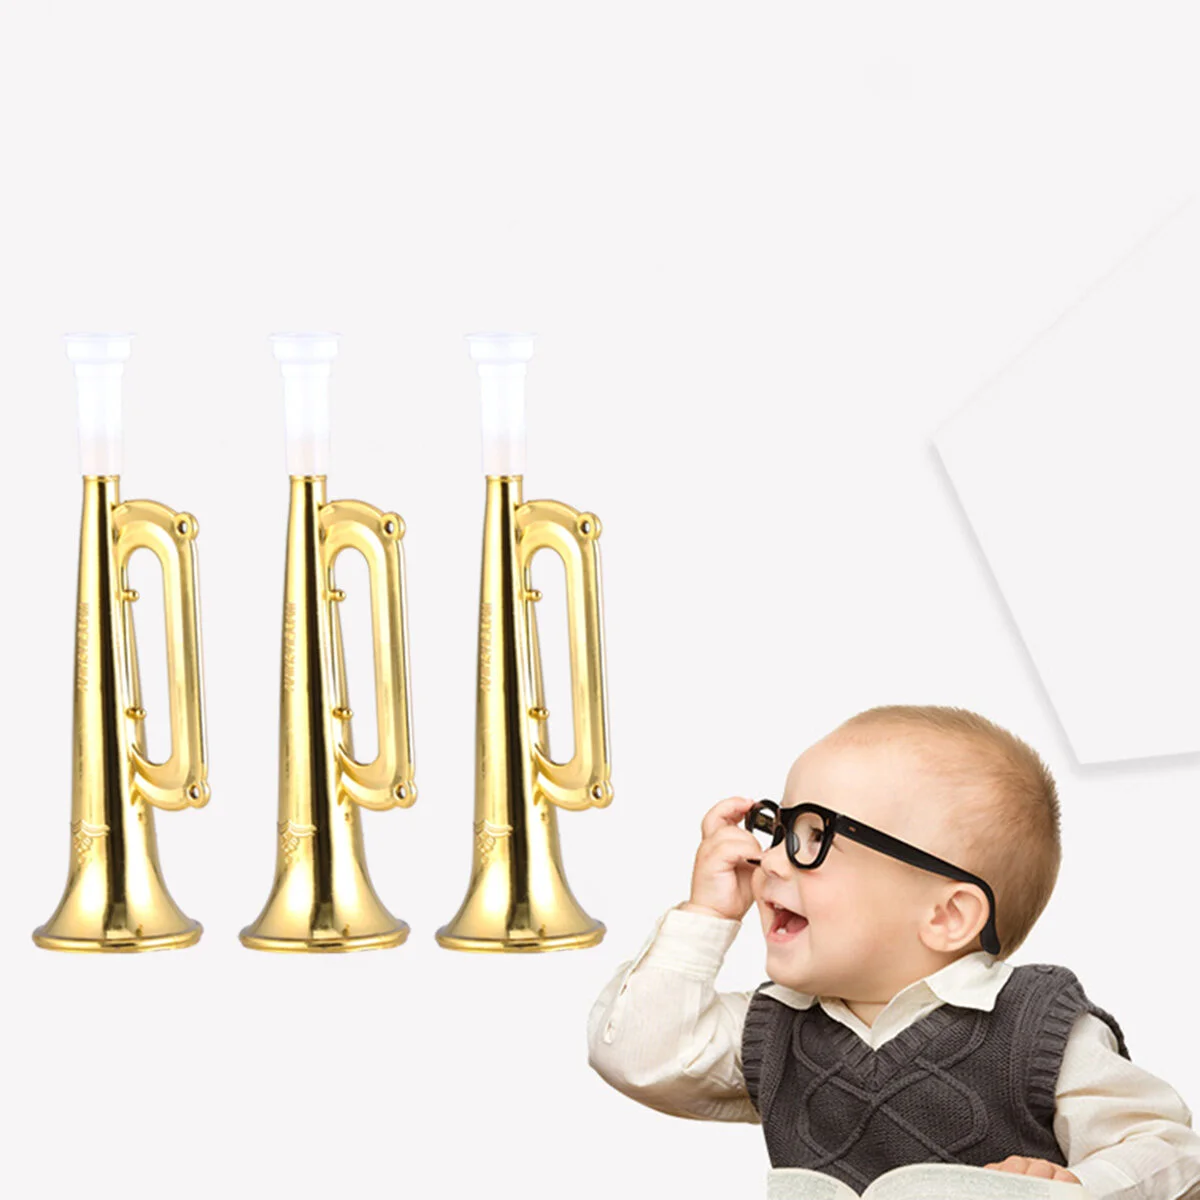 

14pcs Plastic Trumpet Toys Musical Sounding Toys Cheering Props Party Favors Educational Supplies